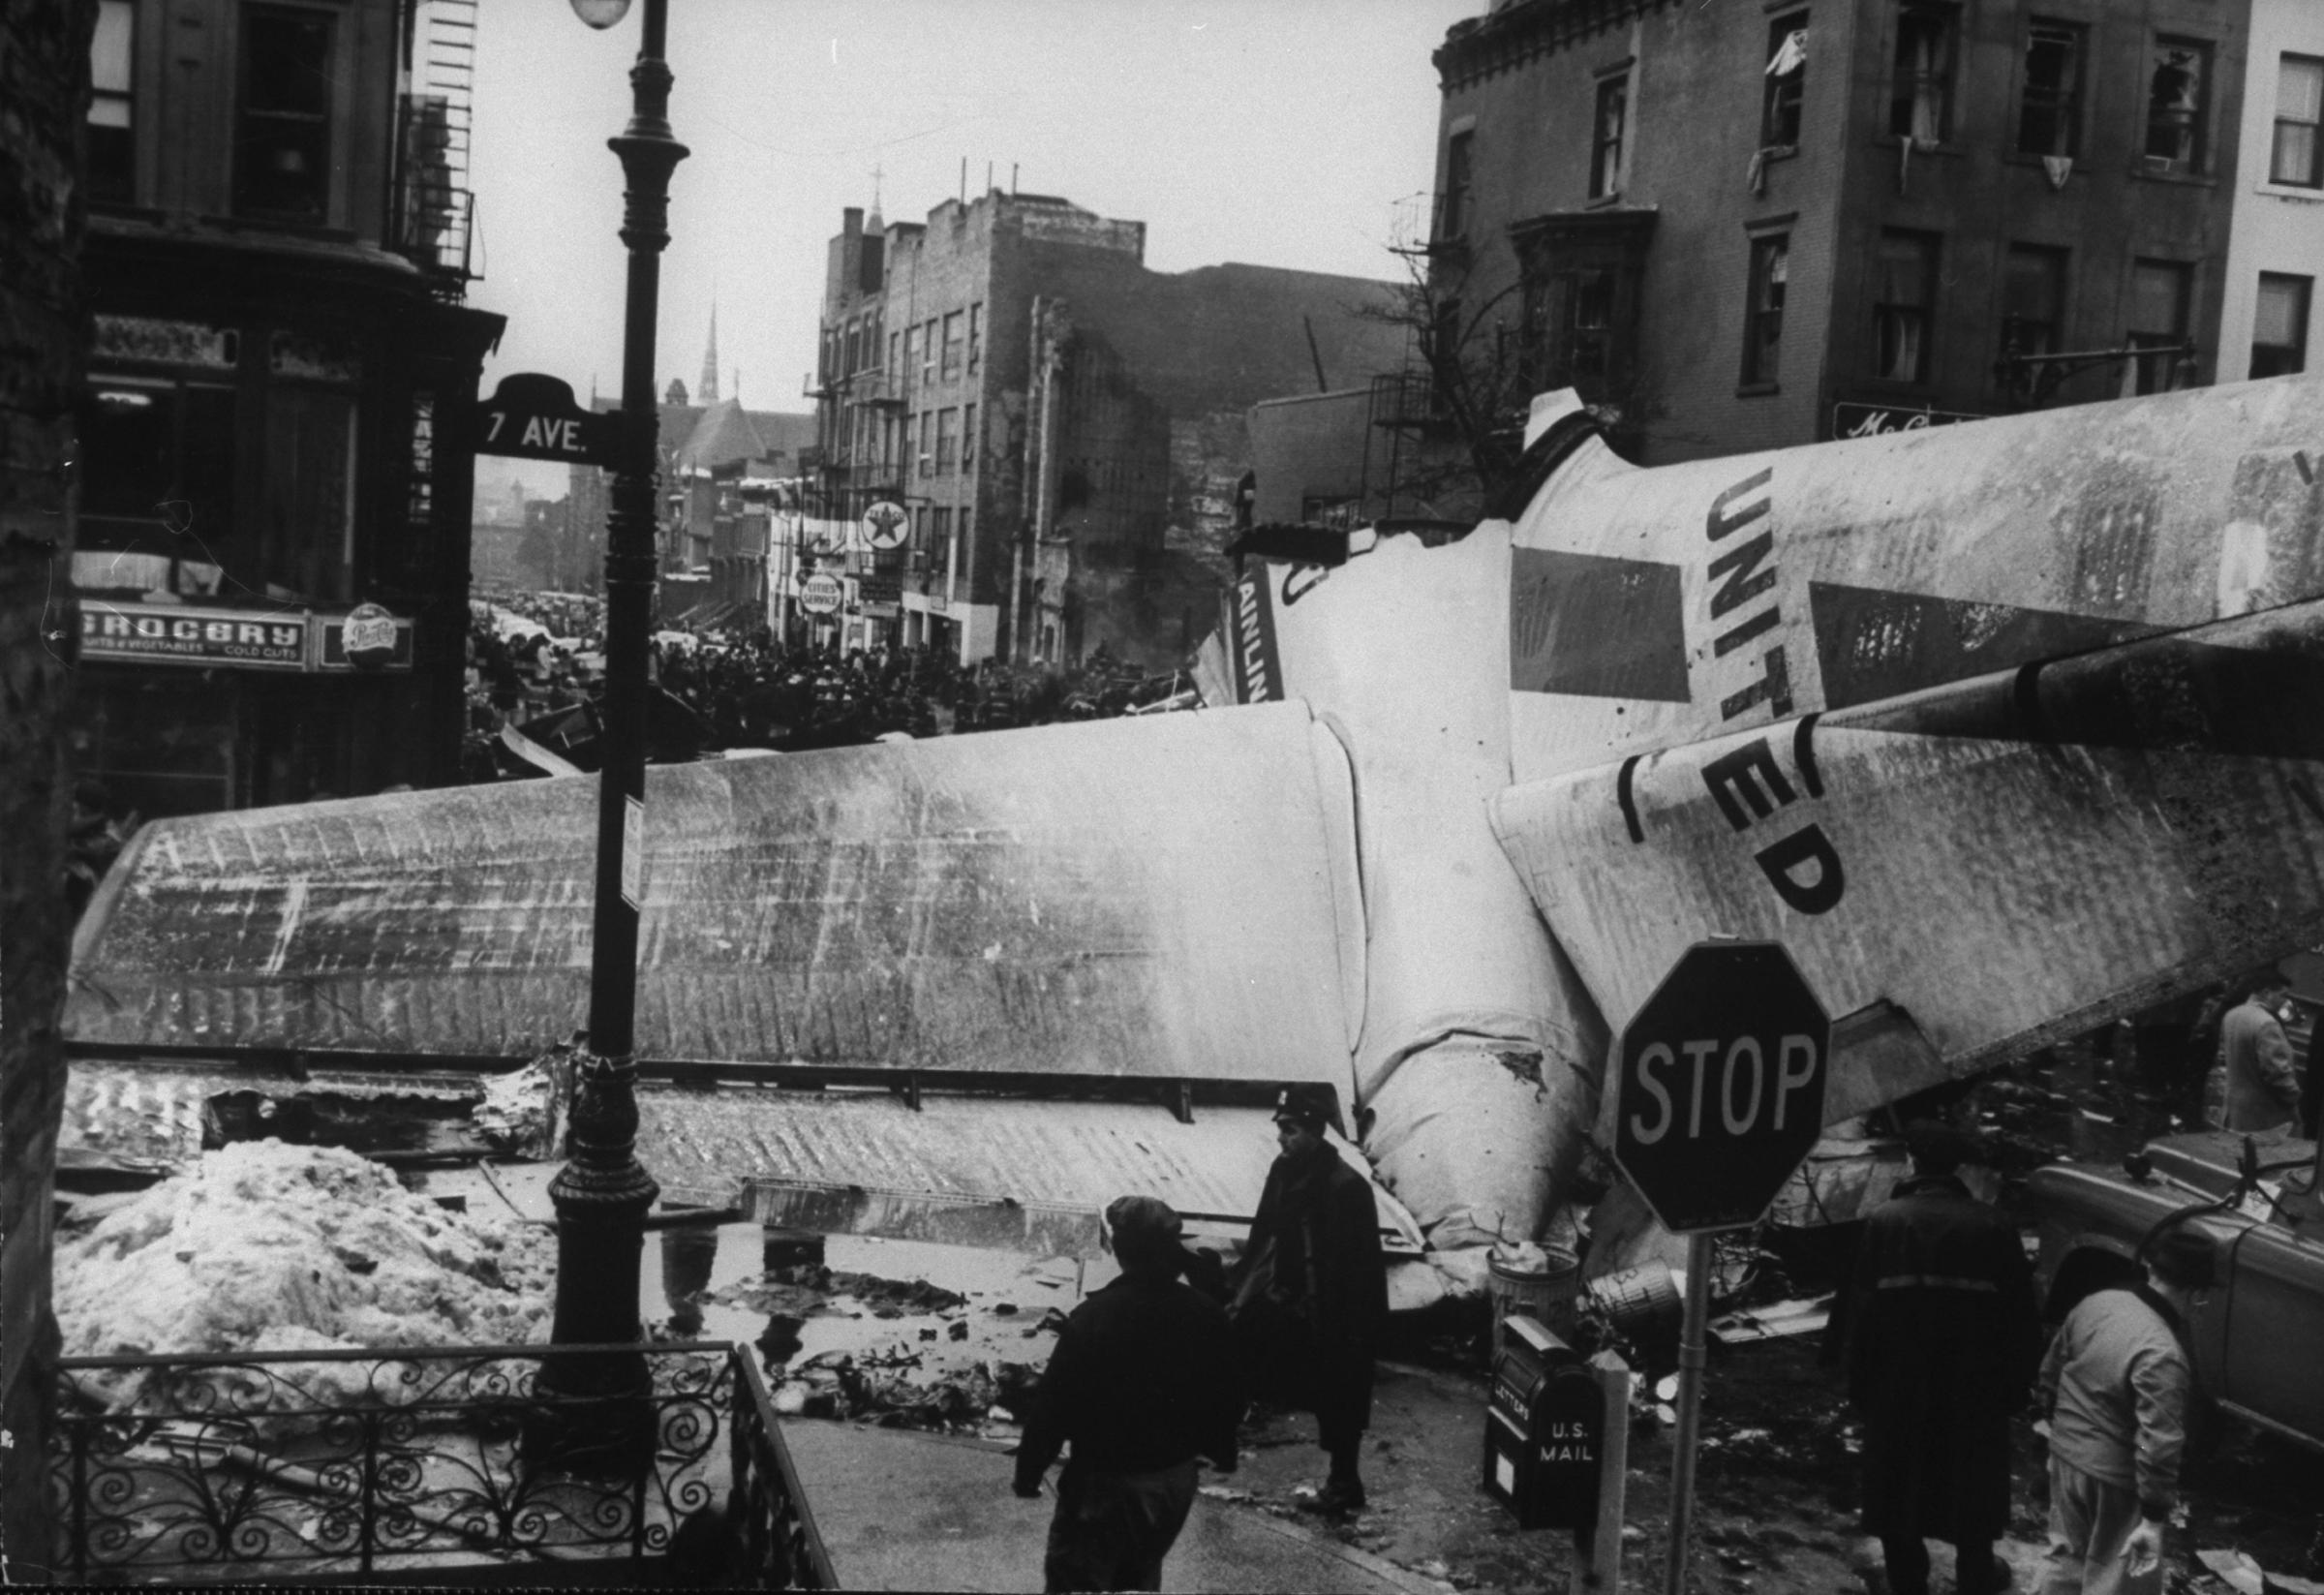 Aftermath of air disaster, Brooklyn, December 1960.